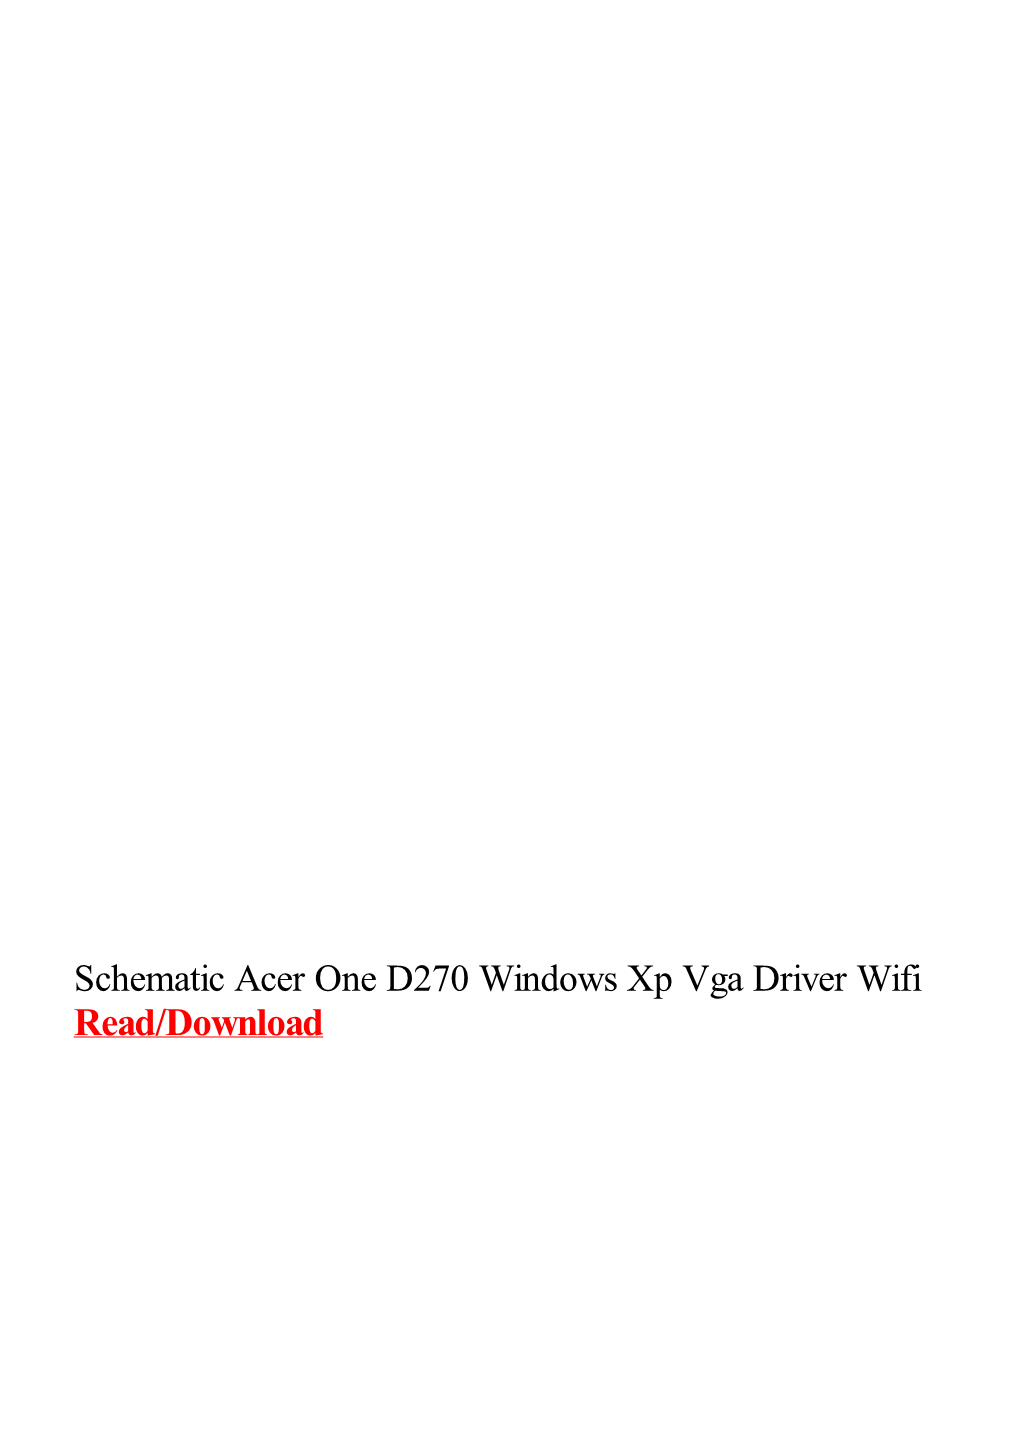 Schematic Acer One D270 Windows Xp Vga Driver Wifi